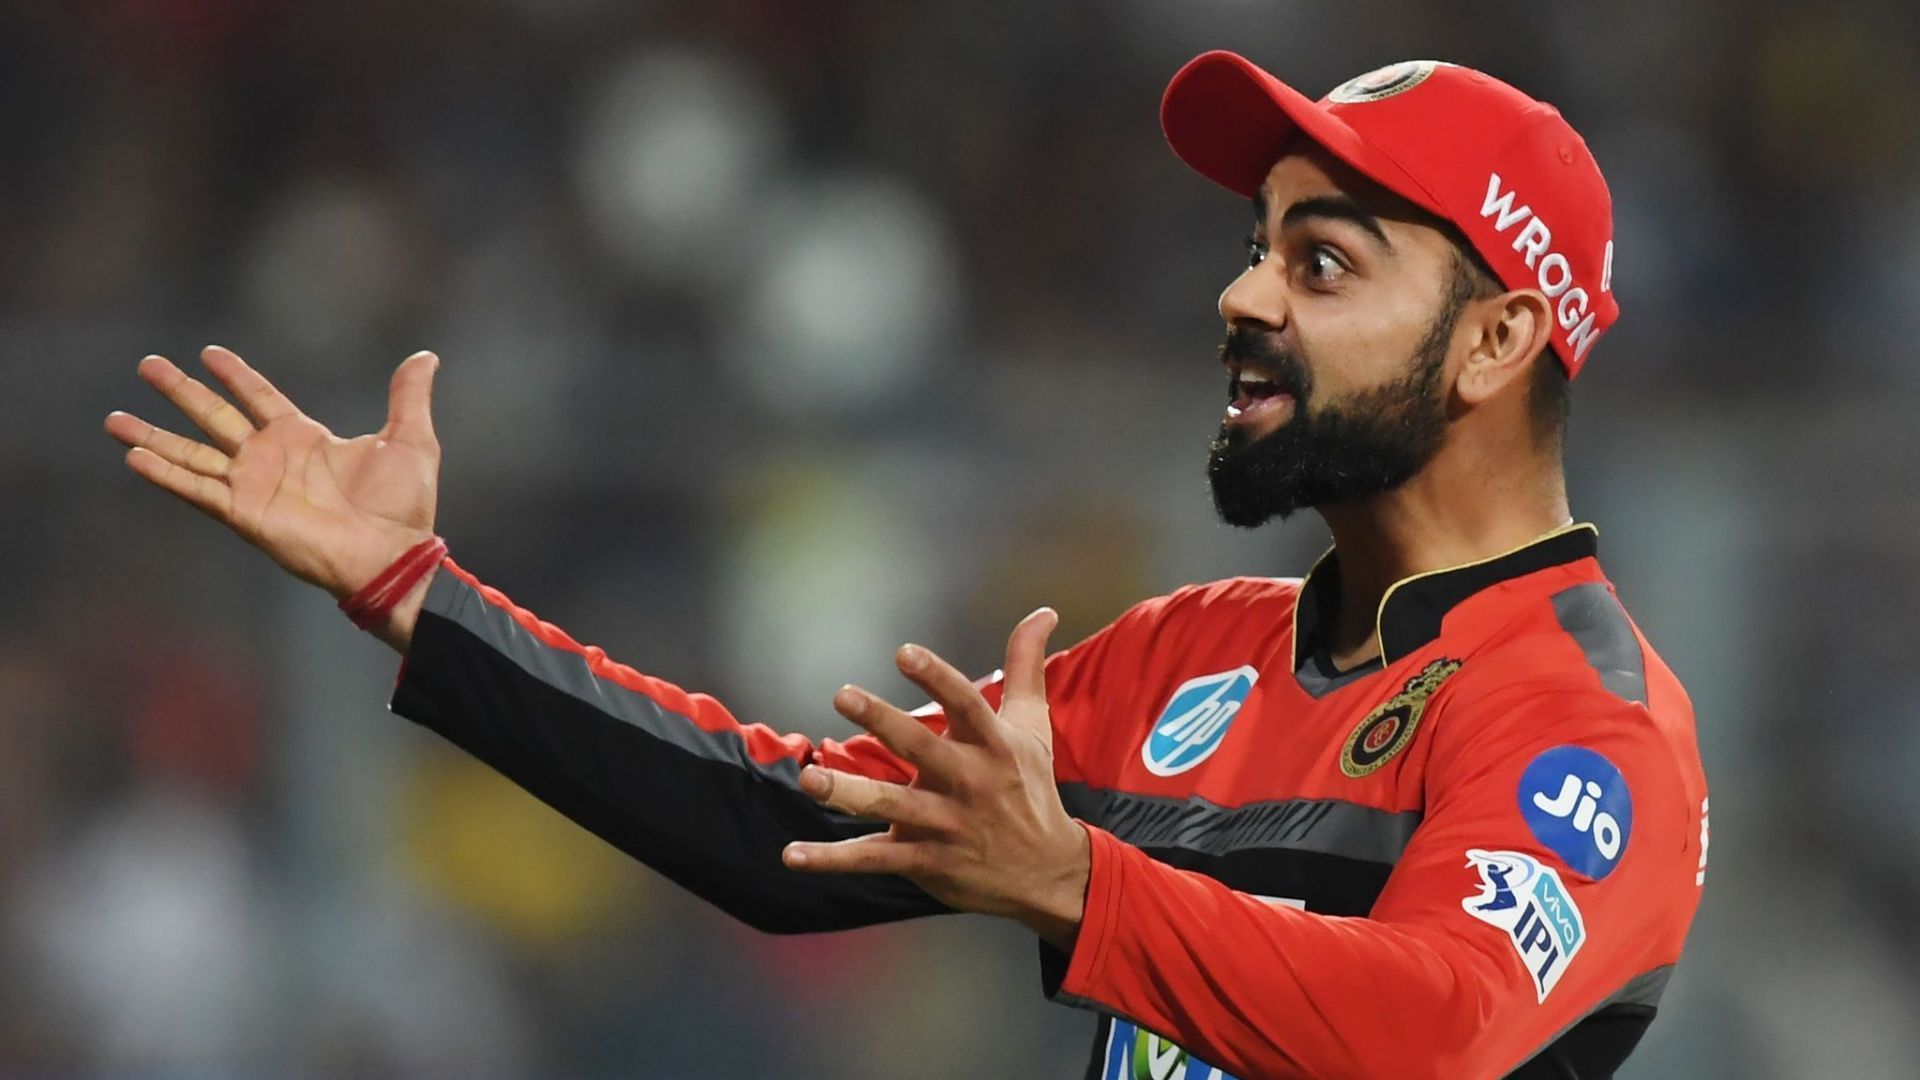 Virat Kohli confirmed that the second leg of the IPL 2021 would be his last as RCB captain.